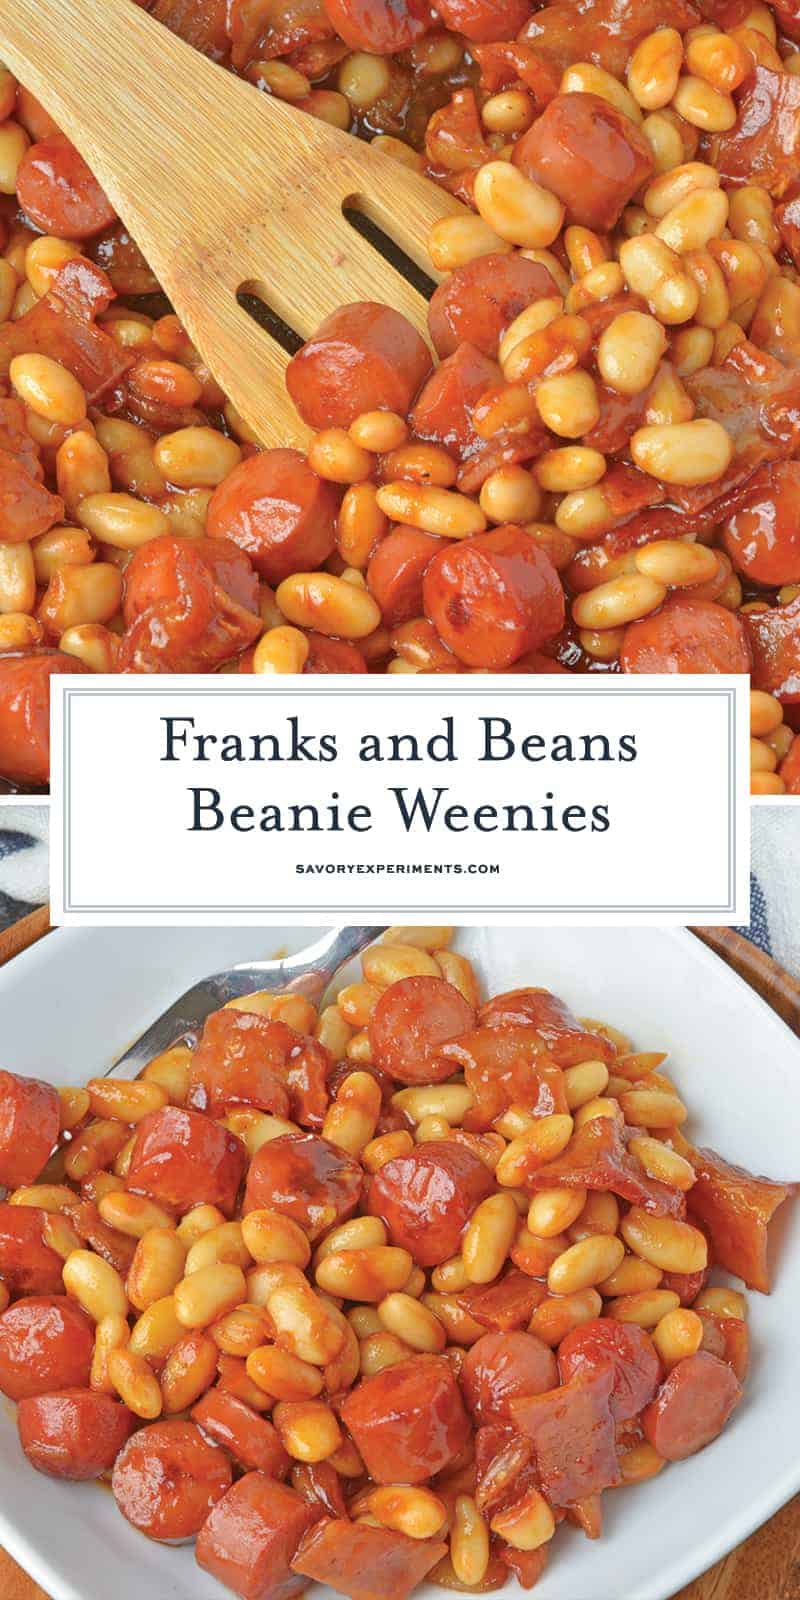 This Franks and Beans recipe, aka Beanie Weenies, is made with real beef hot dogs and less sugar than the canned version. Perfect as a quick and easy lunch or a classic camping food! #franksandbeans #homemadebeanieweenies www.savoryexperiments.com